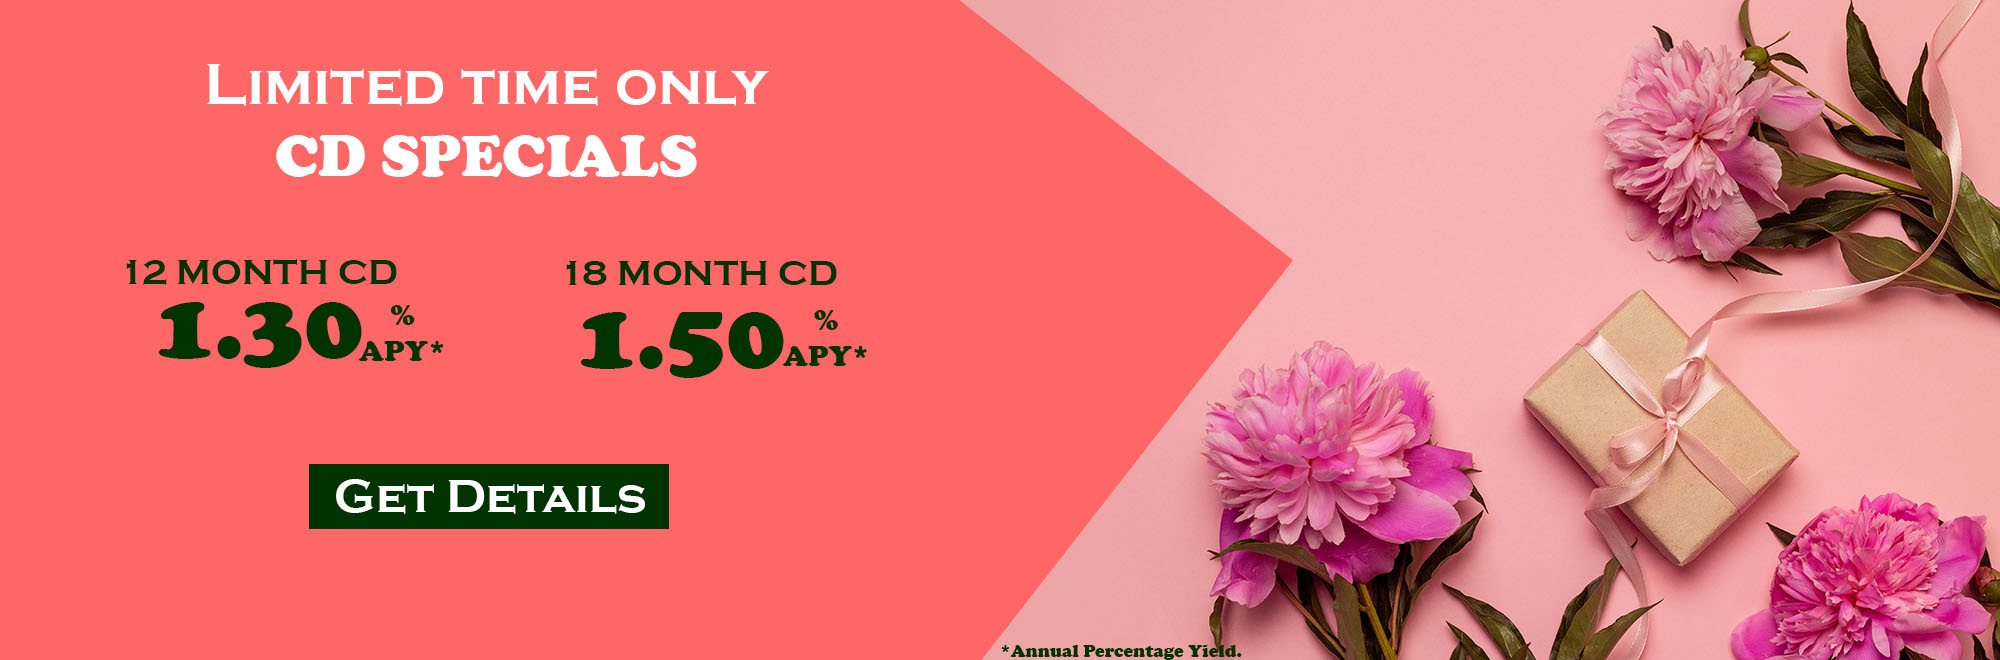 Limited Time Only CD Specials